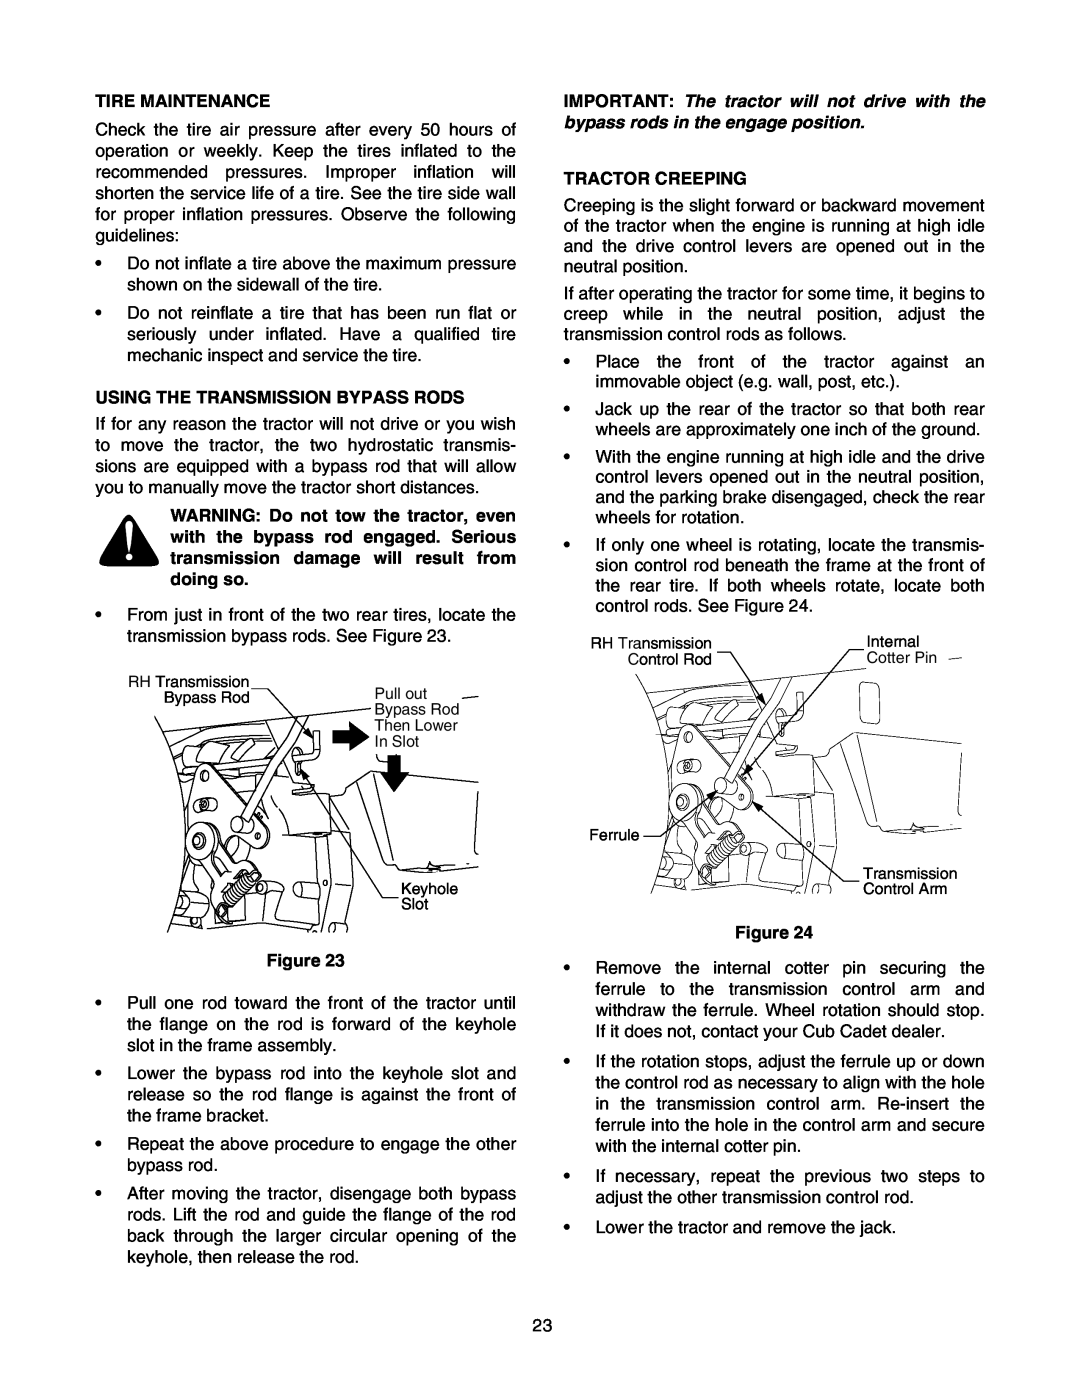 Cub Cadet RZT 50 manual Tire Maintenance, Using The Transmission Bypass Rods, Tractor Creeping 